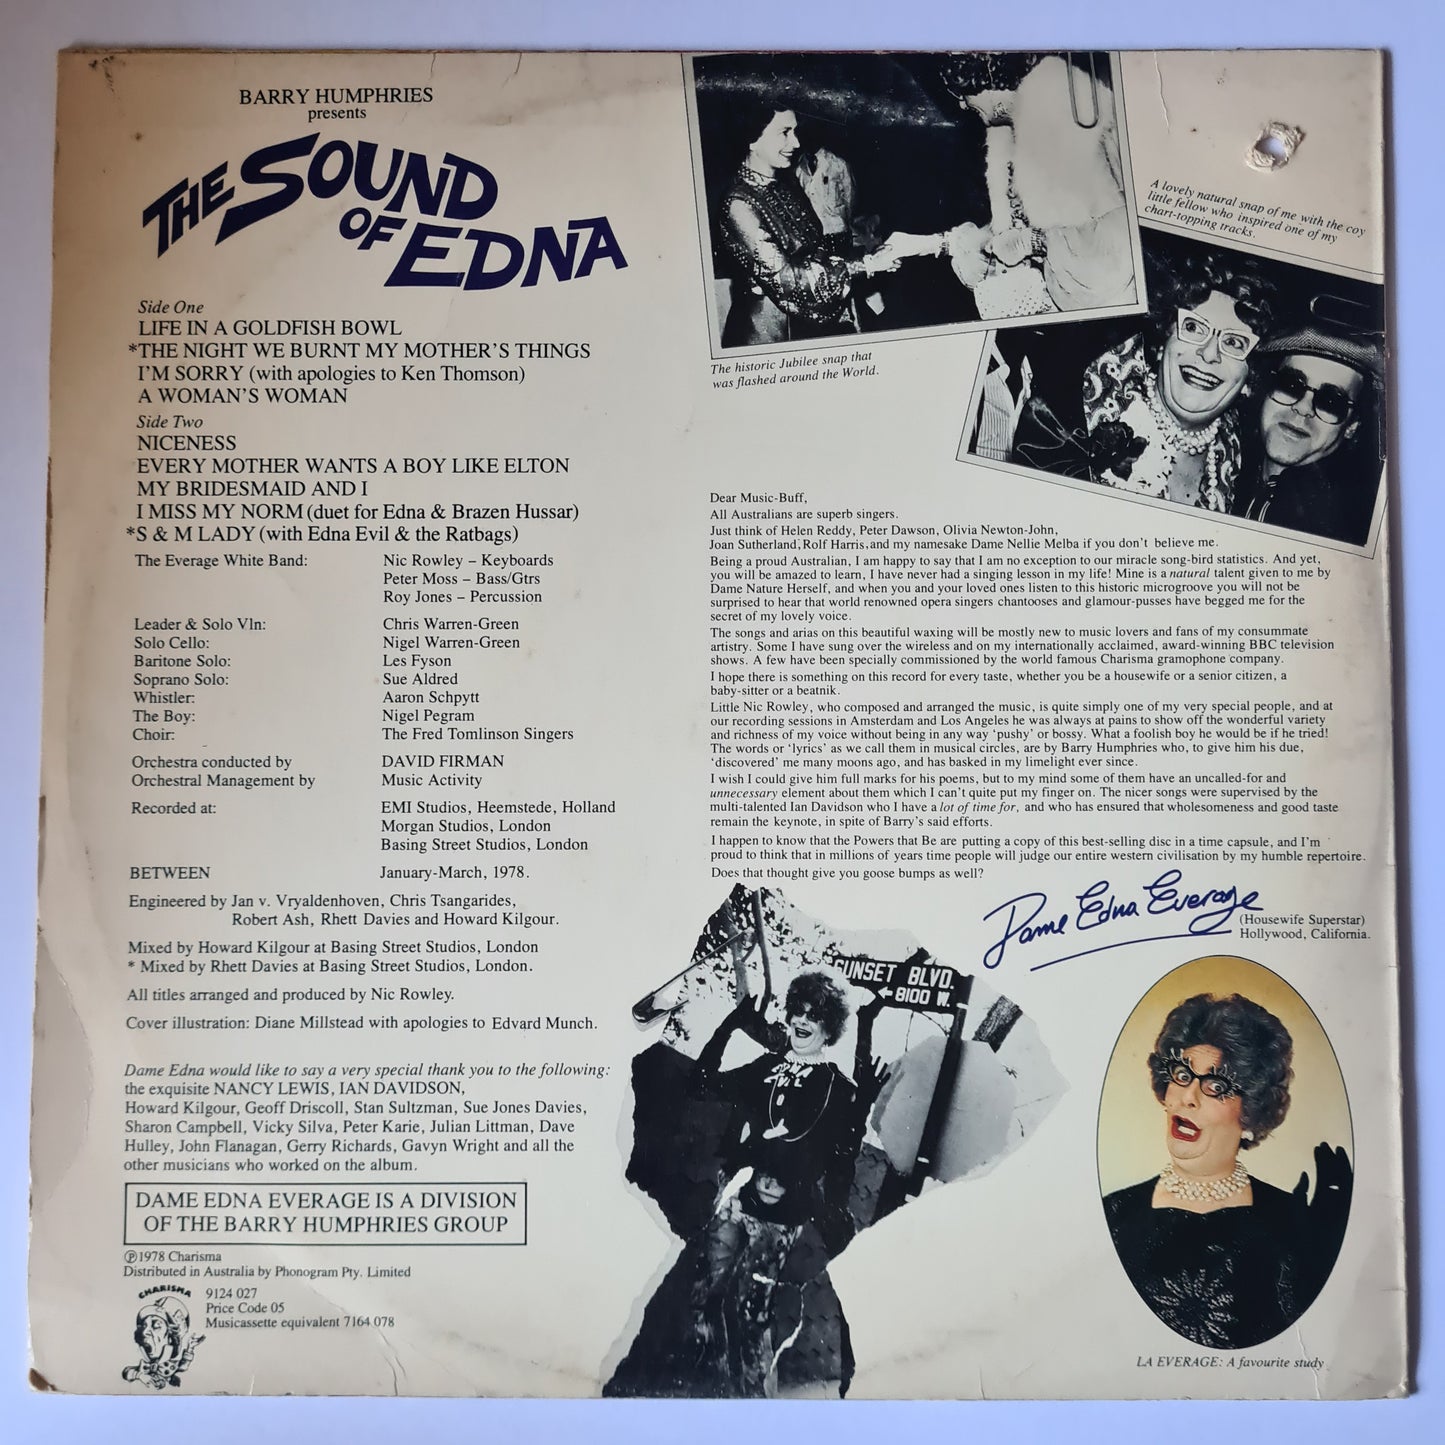 CLEARANCE STOCK! COMEDY: DAME EDNA - VINYL RECORD